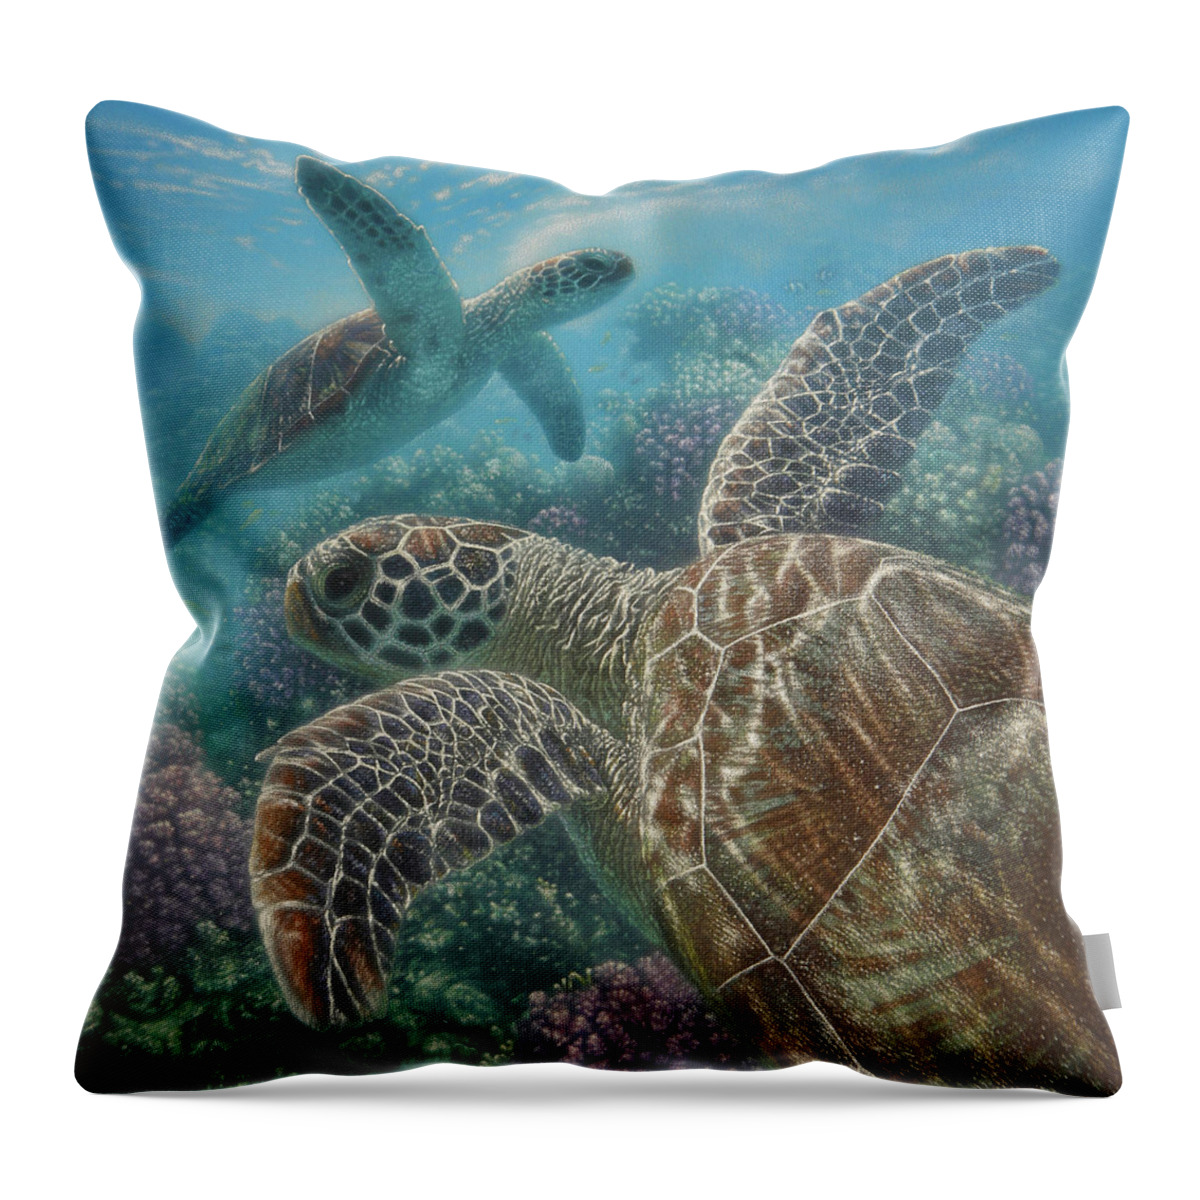 Sea Turtle Art Throw Pillow featuring the painting Turtle Bay by Collin Bogle